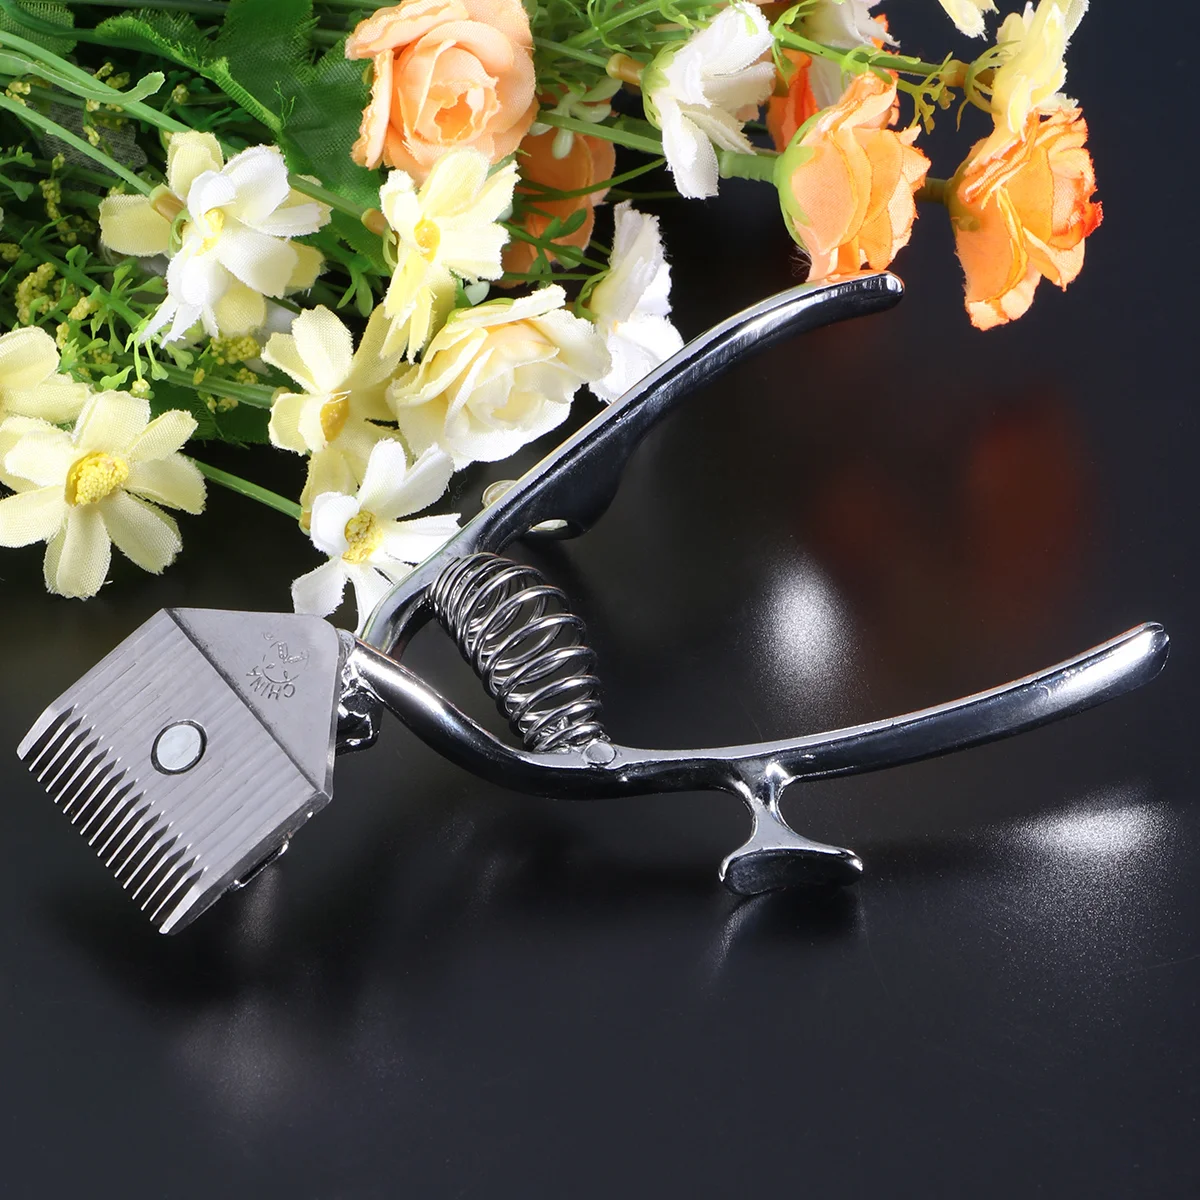 

Hair Manual Clippers Trimmer Haircut Hand Clipper Electric Non Grooming Men Fashion Trimmers Vintage Animal Beard Professional